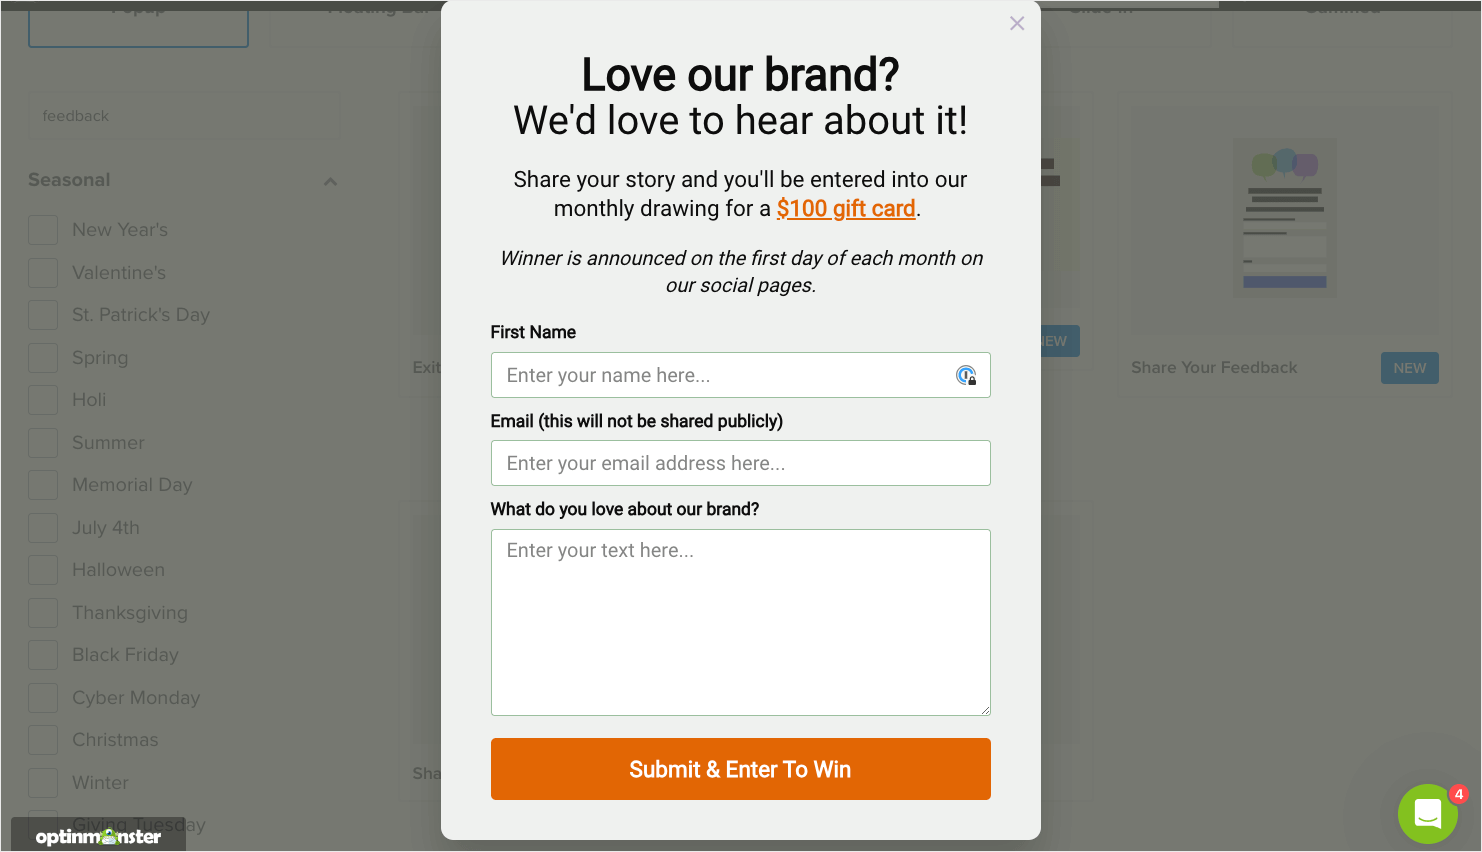 OptinMonster popup that includes fields for First Name, Email address, and a text area asking "What do you love about our brand."